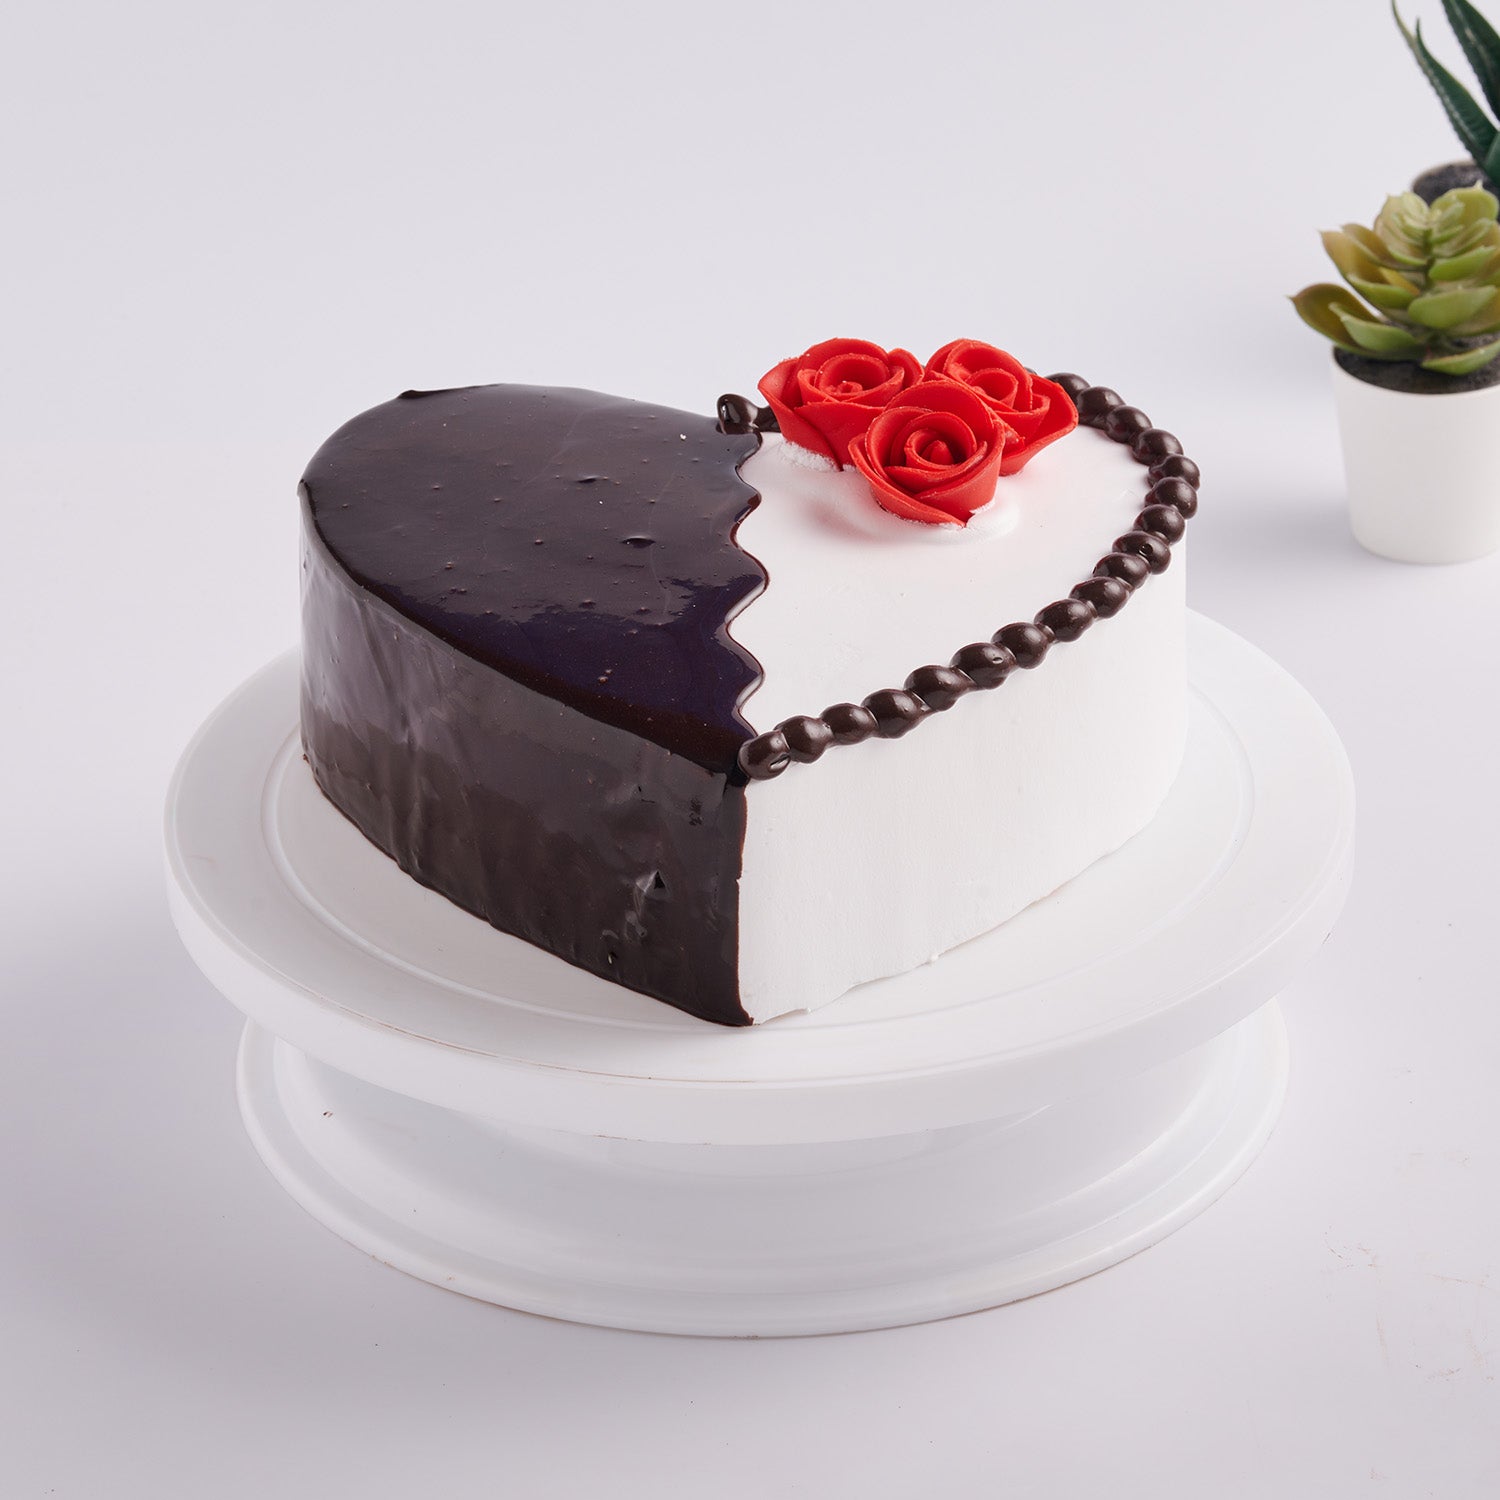 Order Online 2 Kg Chocolate Truffle Cake for Birthday or Anniversary